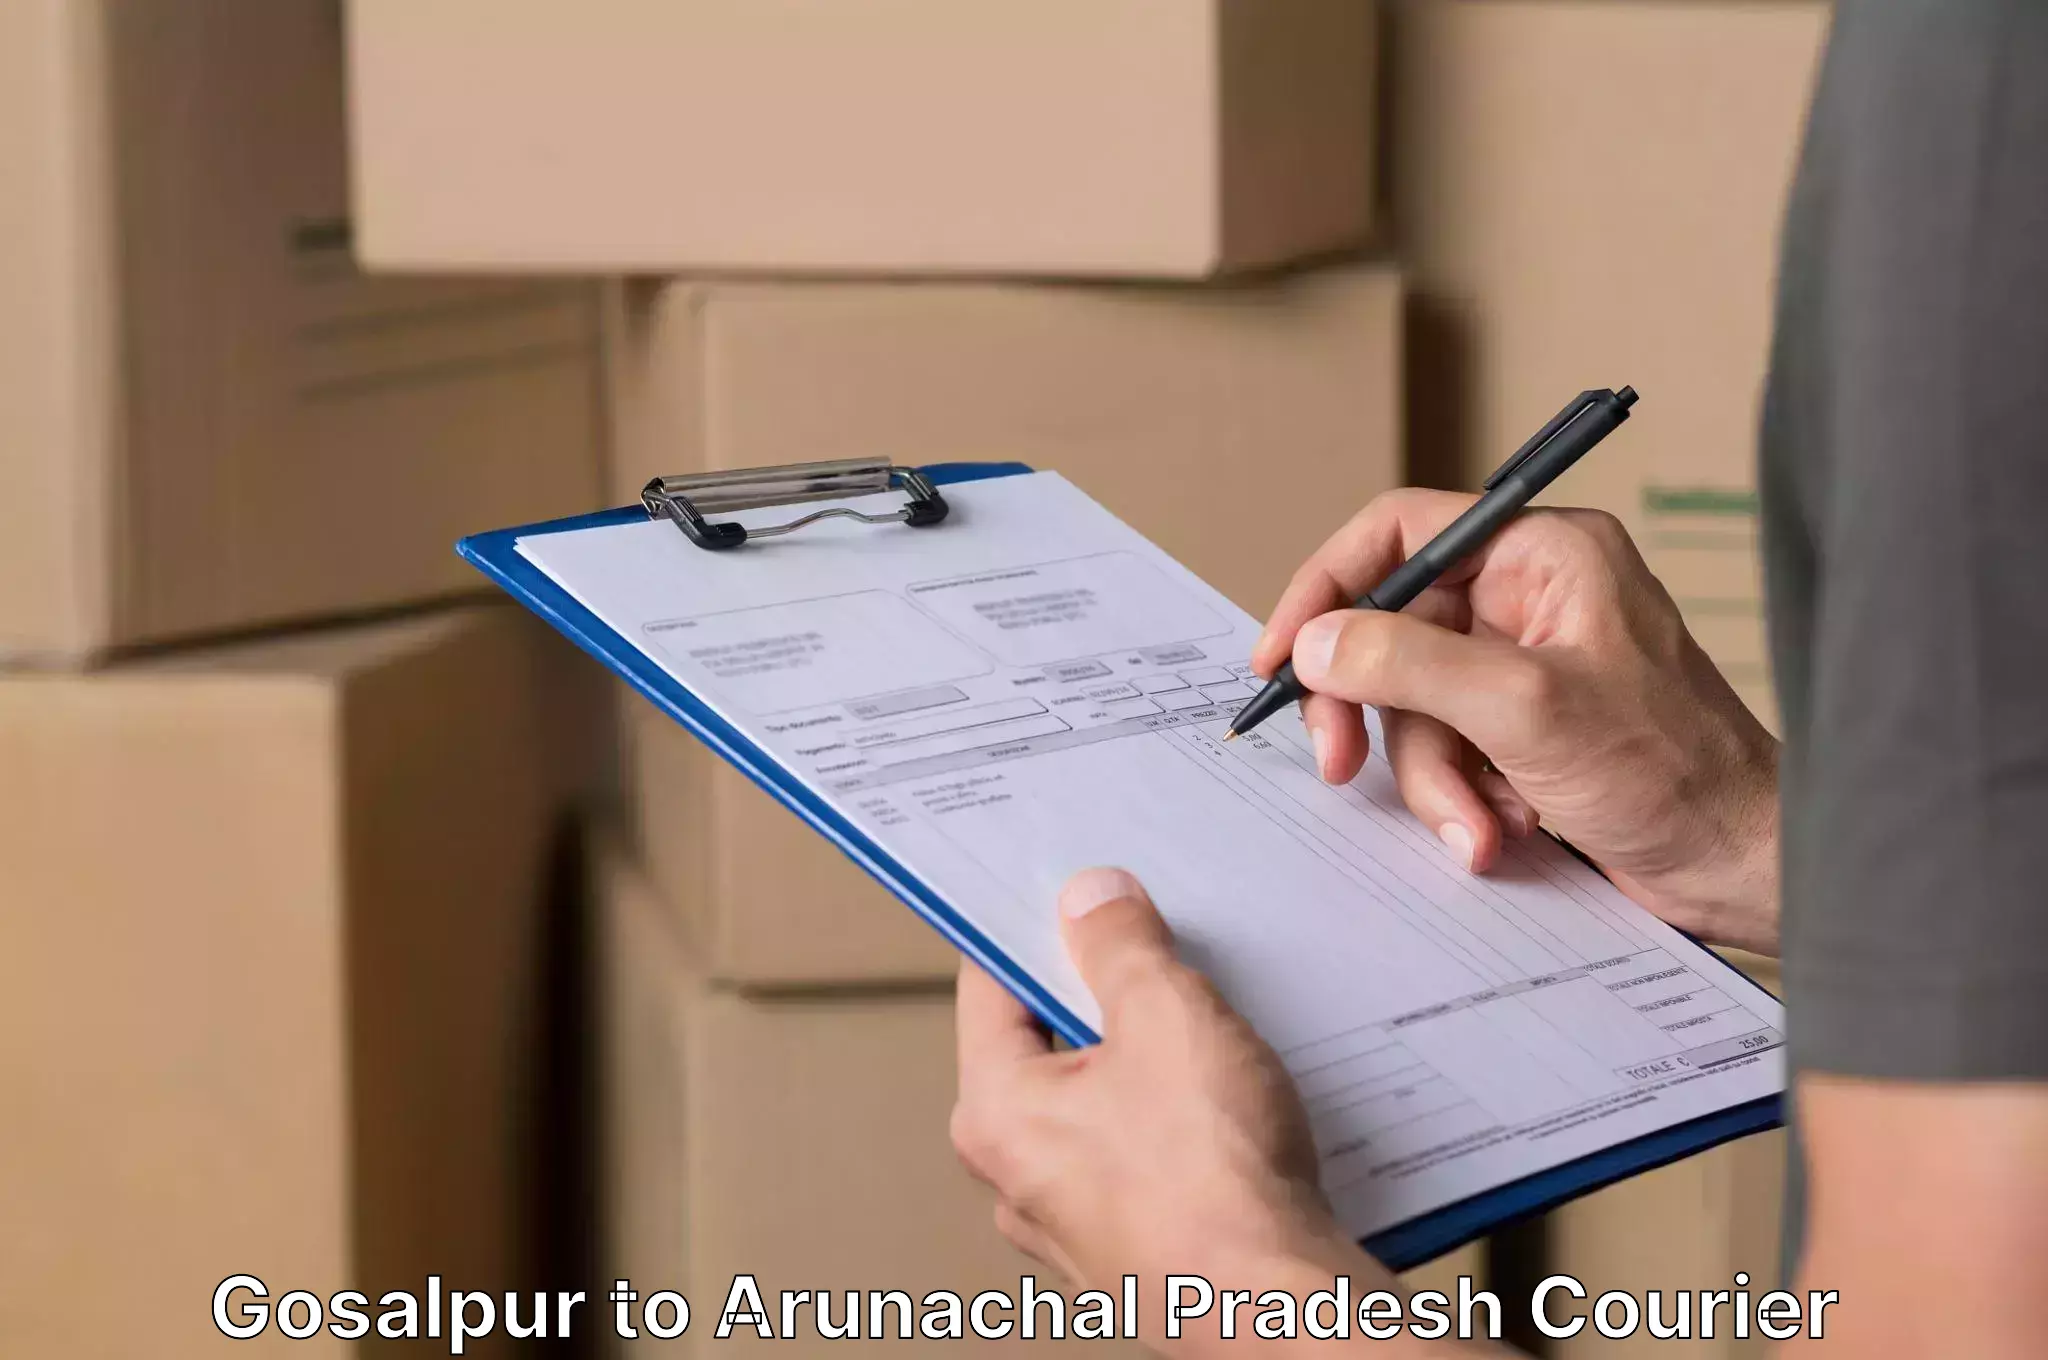 Quality relocation services Gosalpur to Aalo